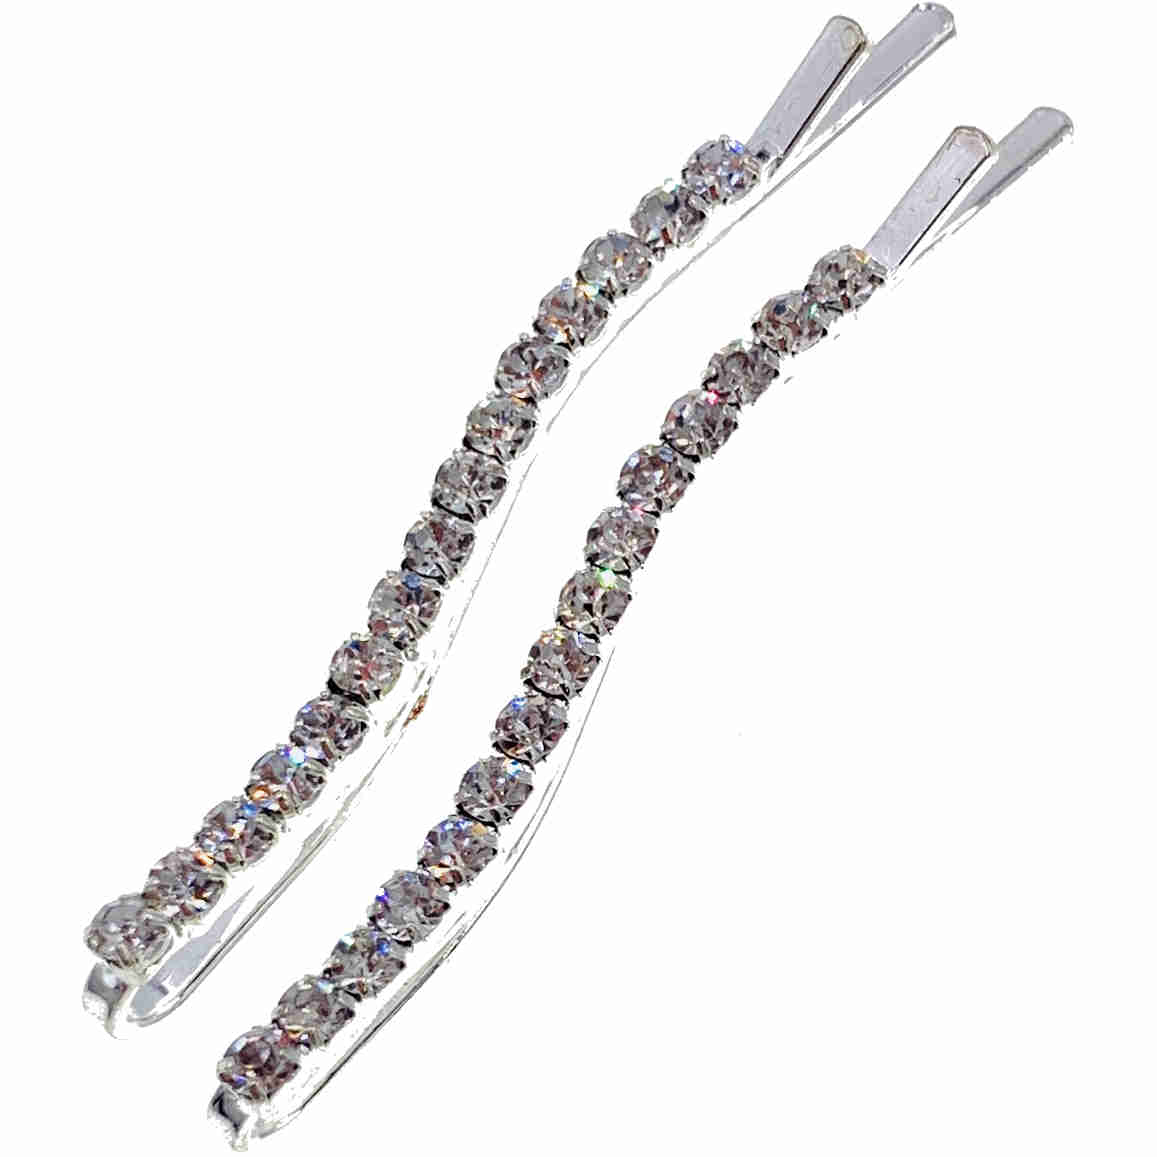 Simple Curving Bobby Pin Pair Rhinestone Crystal Silver Gold (2 colors)